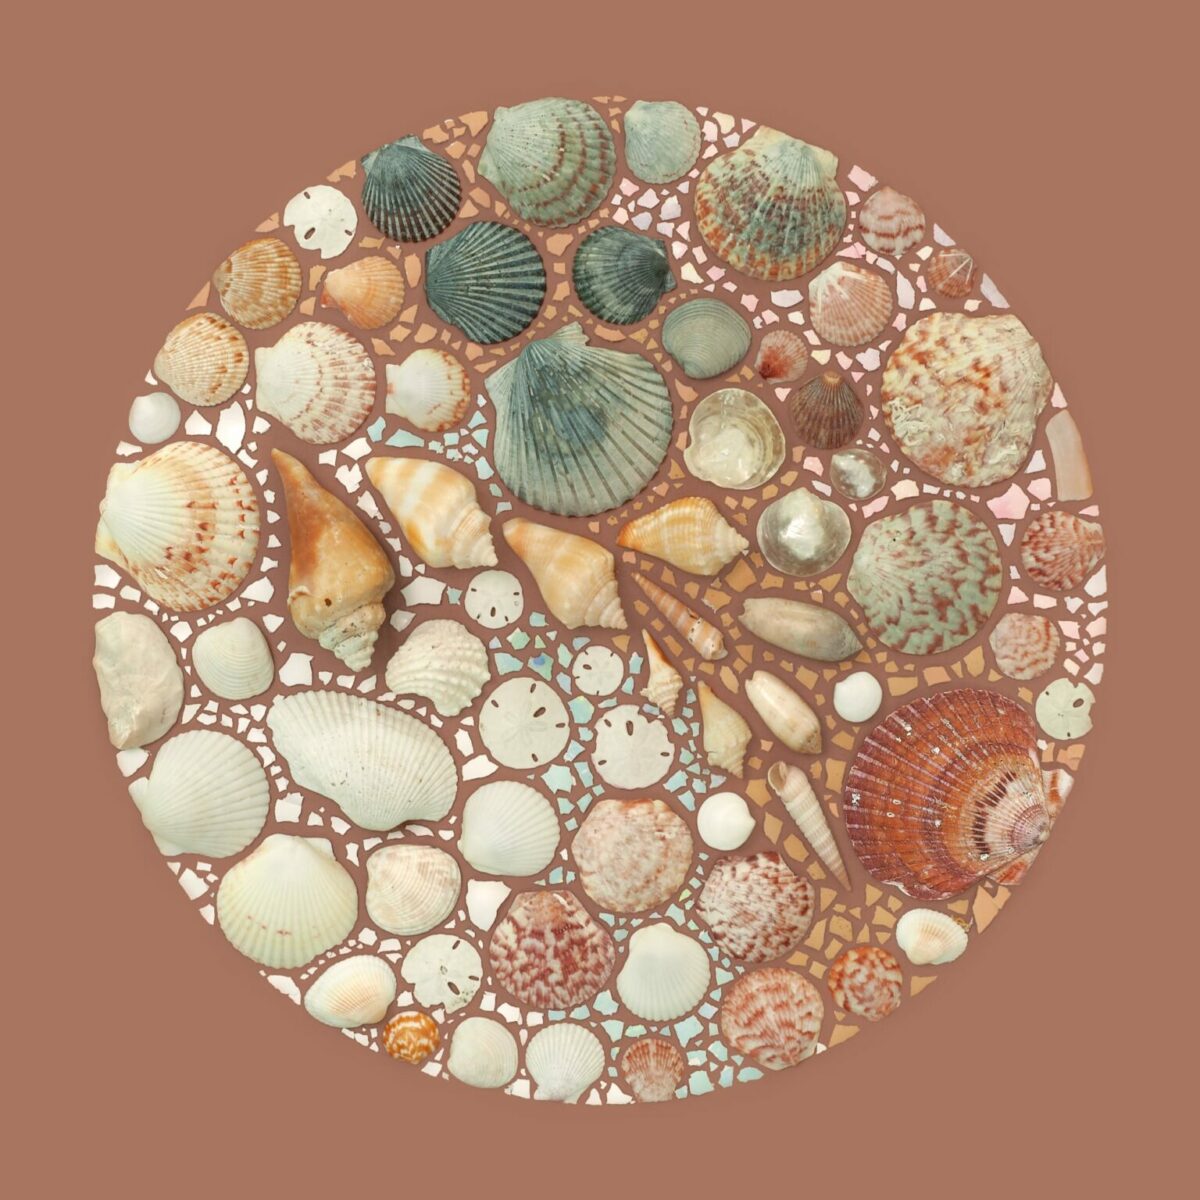 Incredible Mosaics Made Of Natural Materials Food And Everyday Objects By Kristen Meyer 21